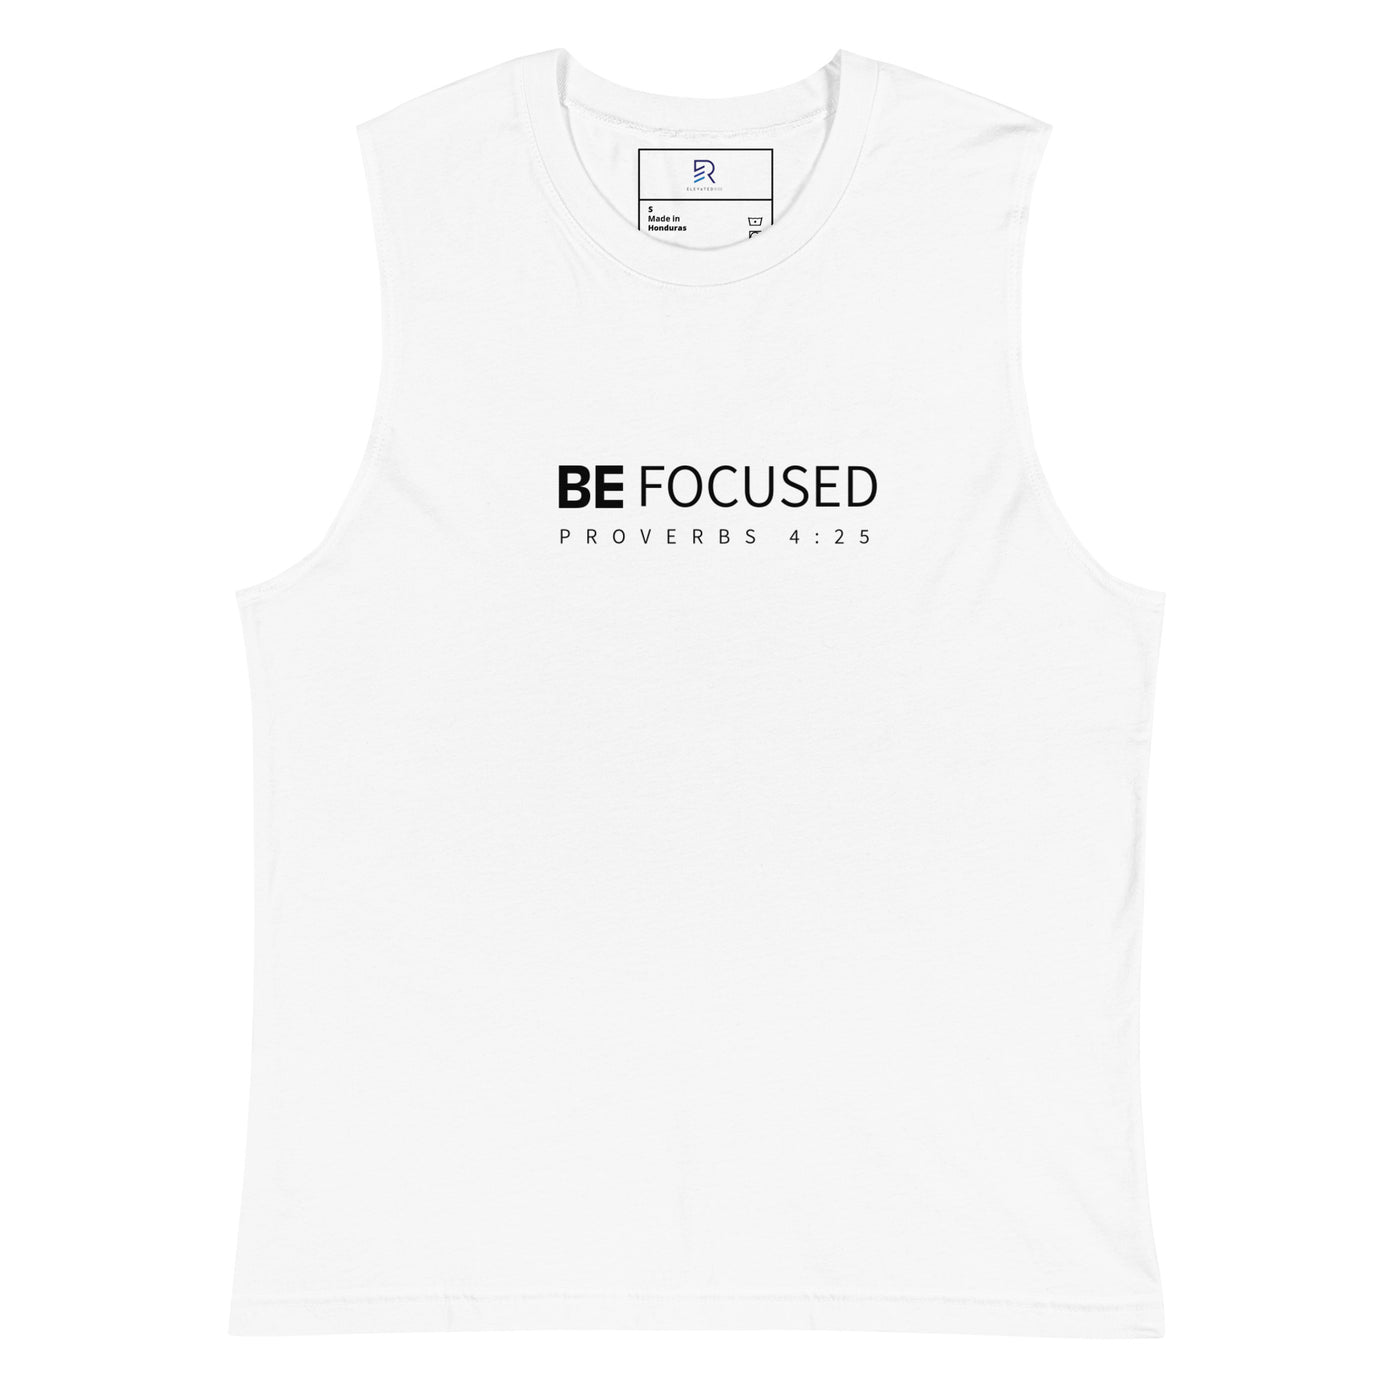 Women's White Muscle Shirt - Be Focused Proverbs 4:25